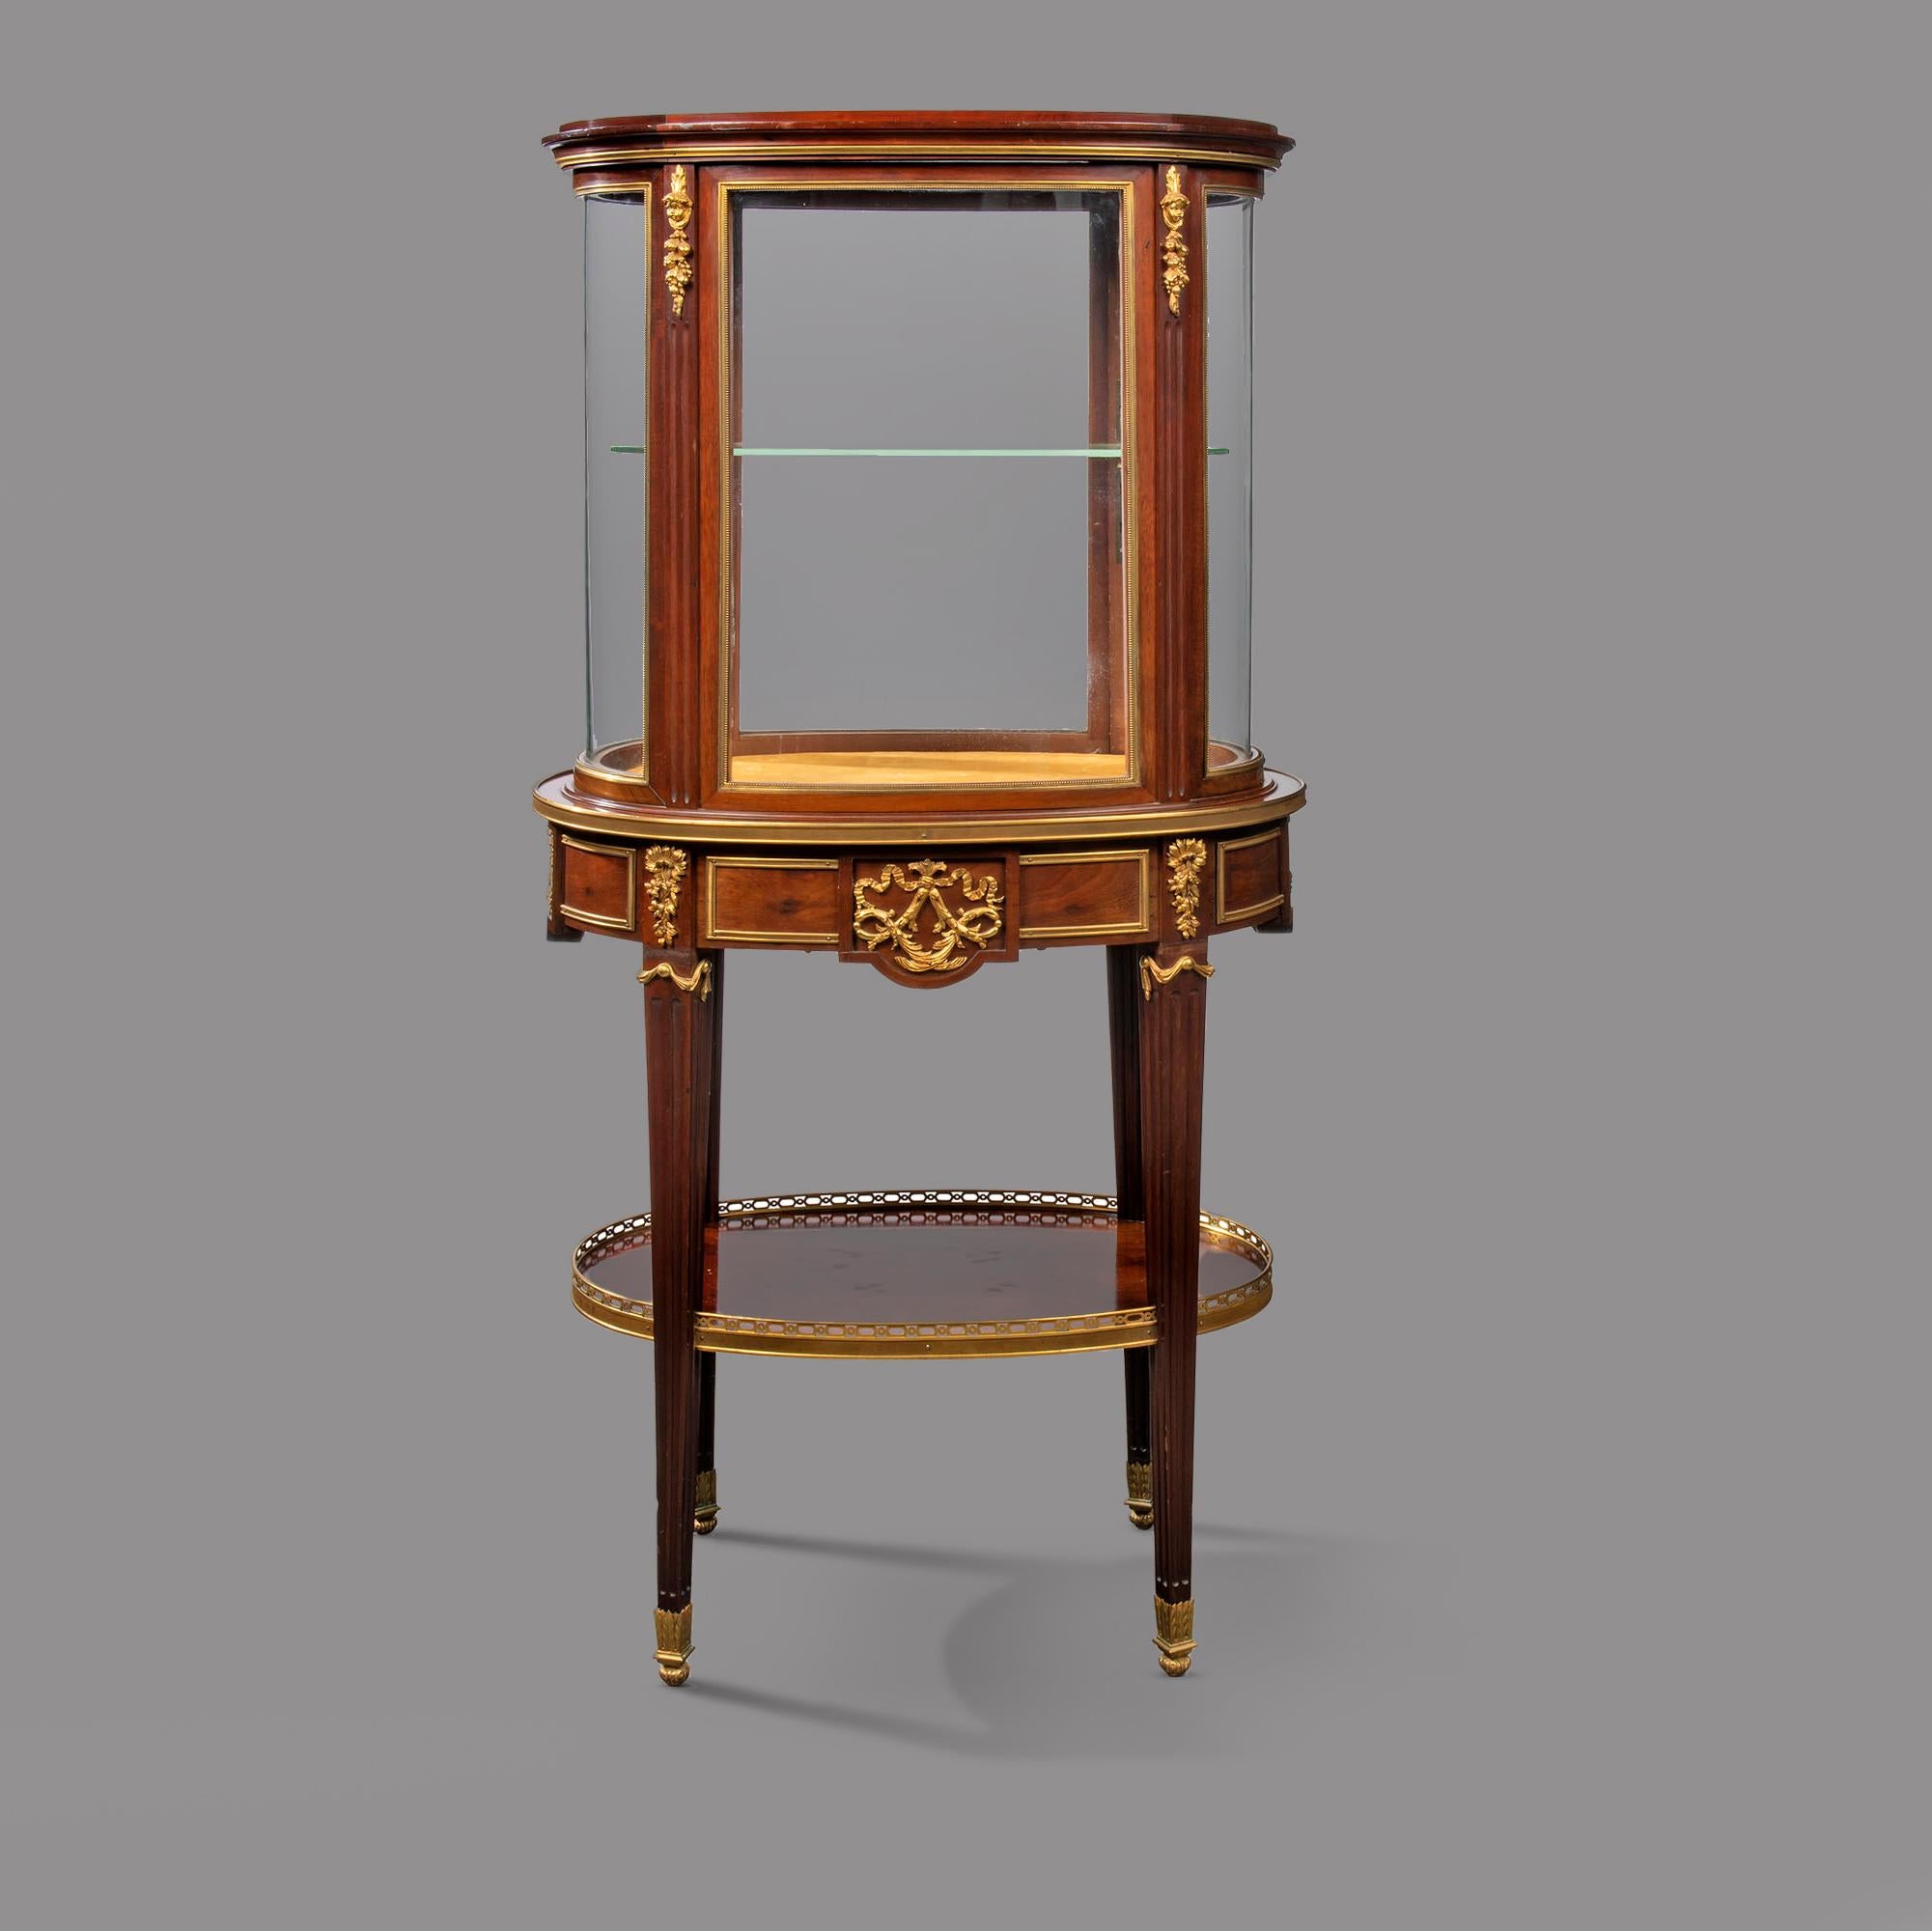 A Fine Louis XVI Style Gilt-Bronze Mounted Mahogany Centre Display Cabinet or ‘Vitrine de Milieu’, By Paul Sormani, Paris. 

The oval vitrine cabinet with four curved glass panes divided by fluted pilasters with cherub mask fruiting gilt-bronze